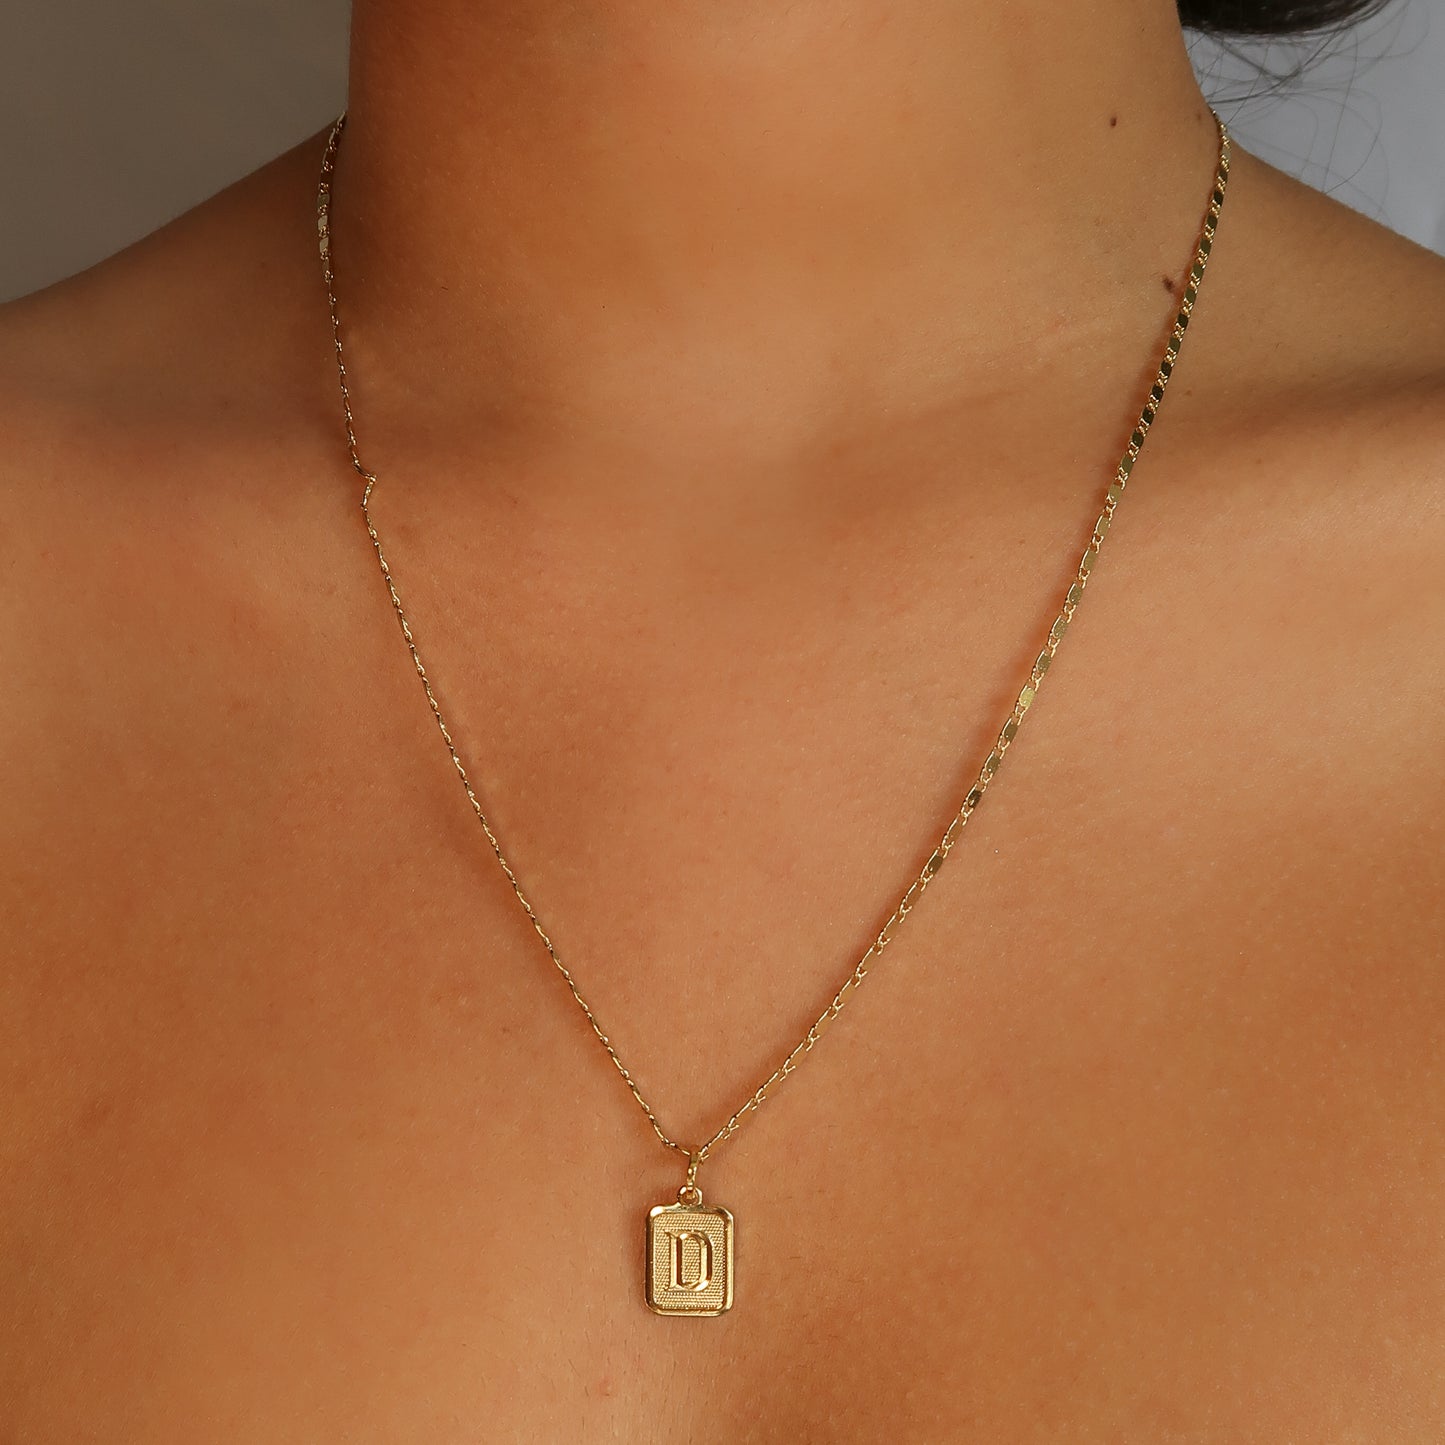 Lovers Initial Pendant Necklace